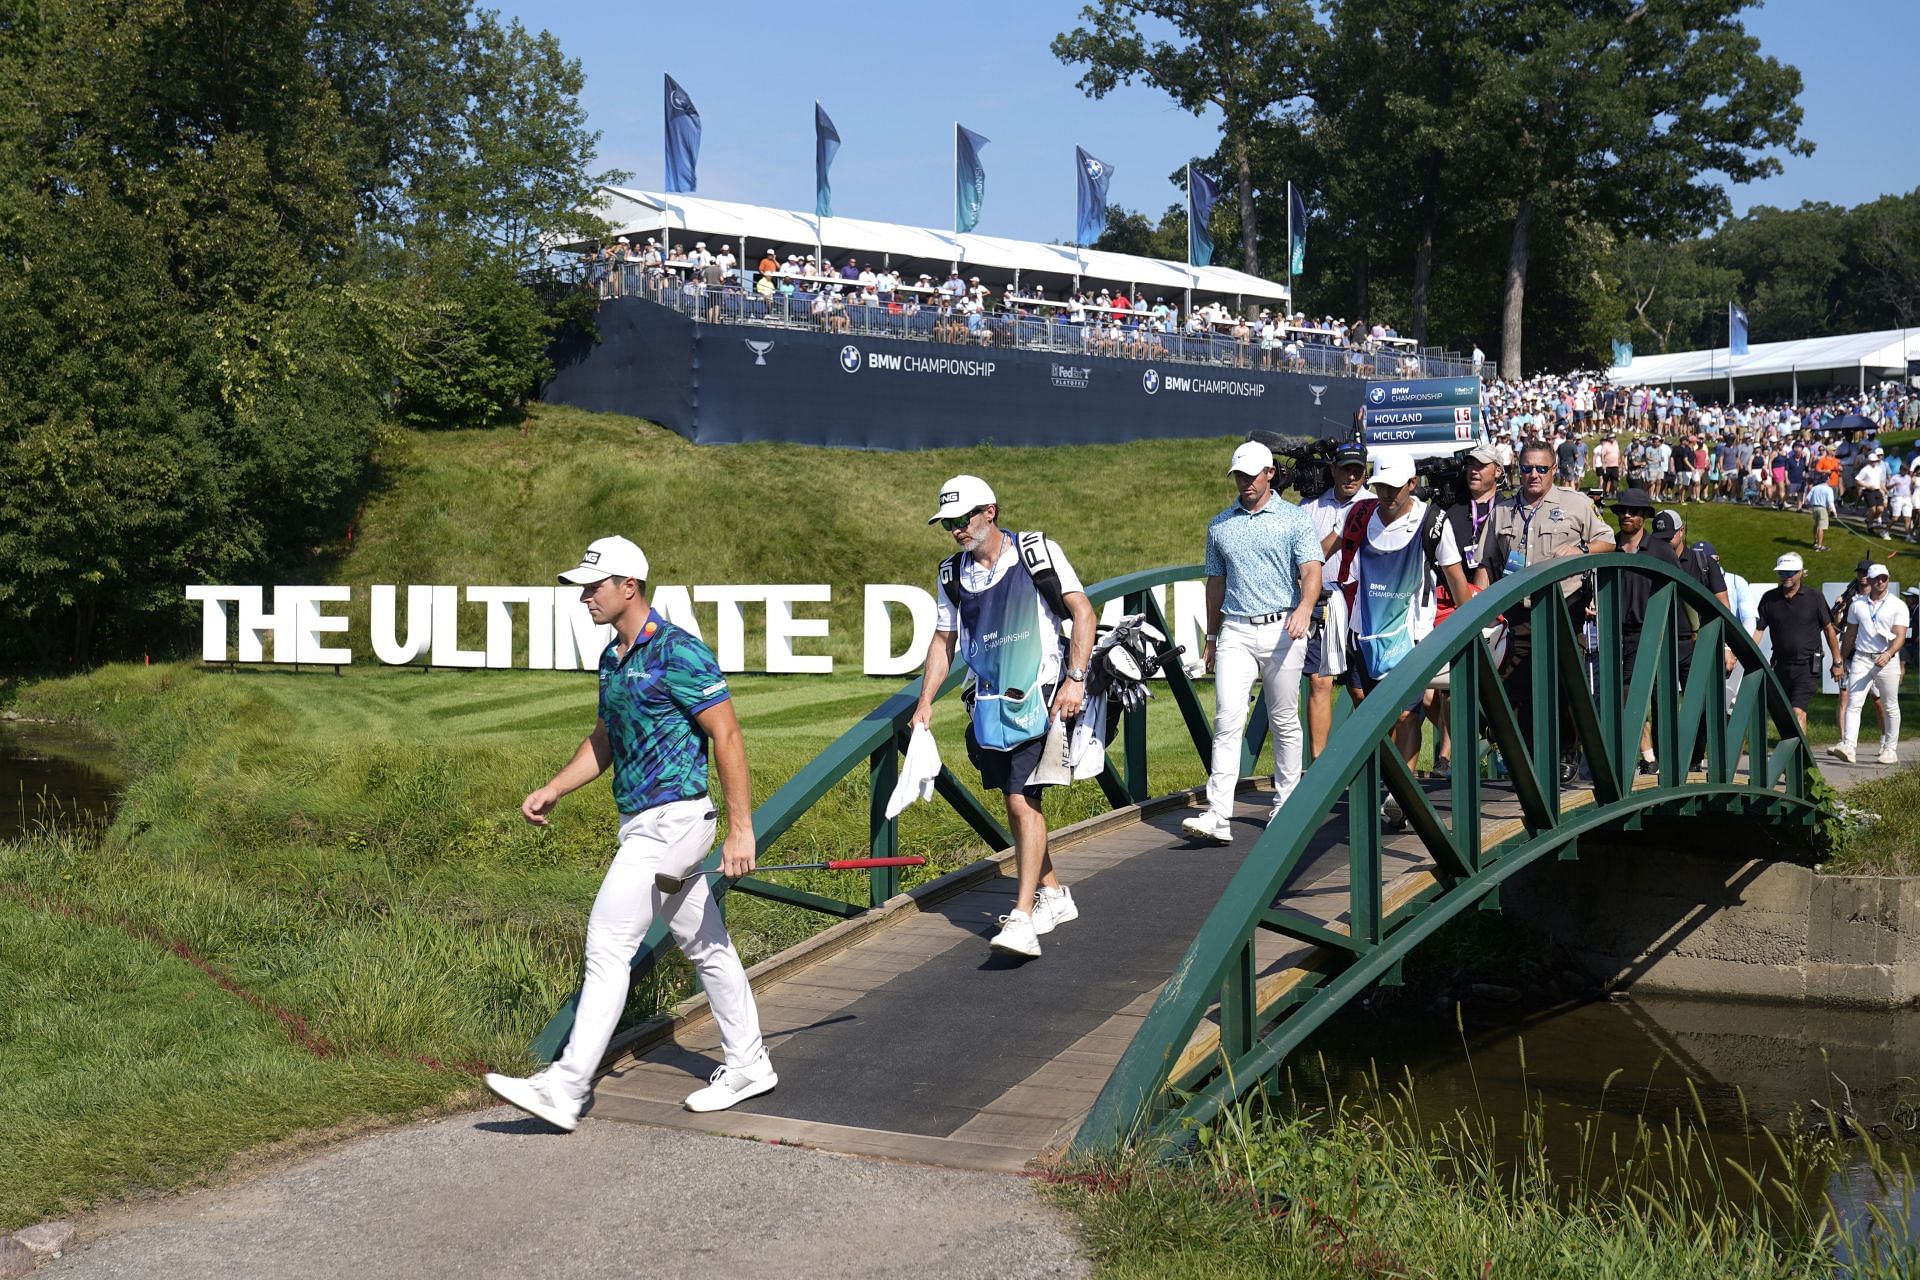 BMW Championship leaderboard, payouts, and more